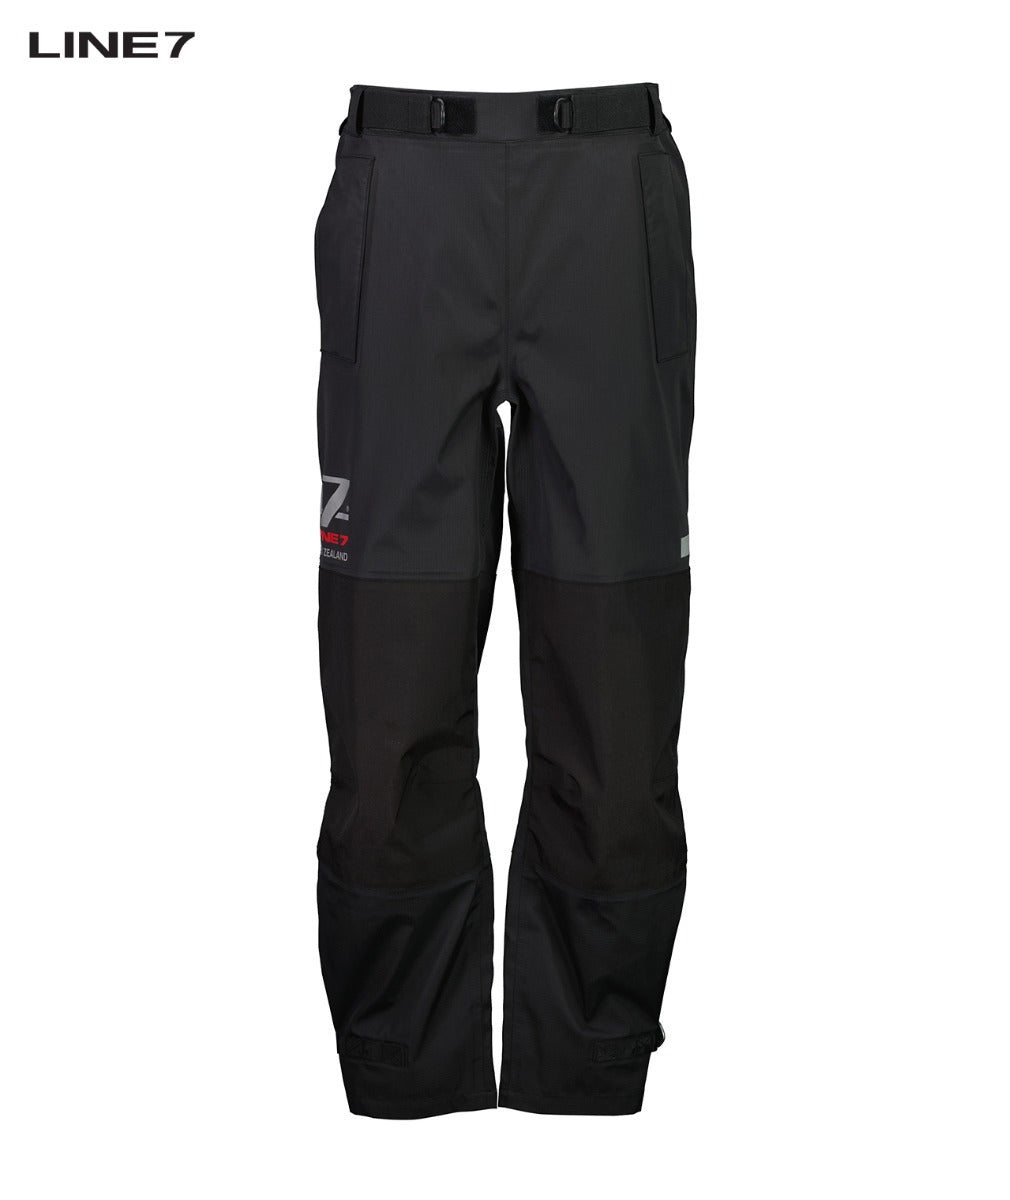 http://sugarloafclothingco.co.uk/cdn/shop/products/line-7-men-s-territory-storm-pro20-waterproof-overtrouser.jpg?v=1666030231